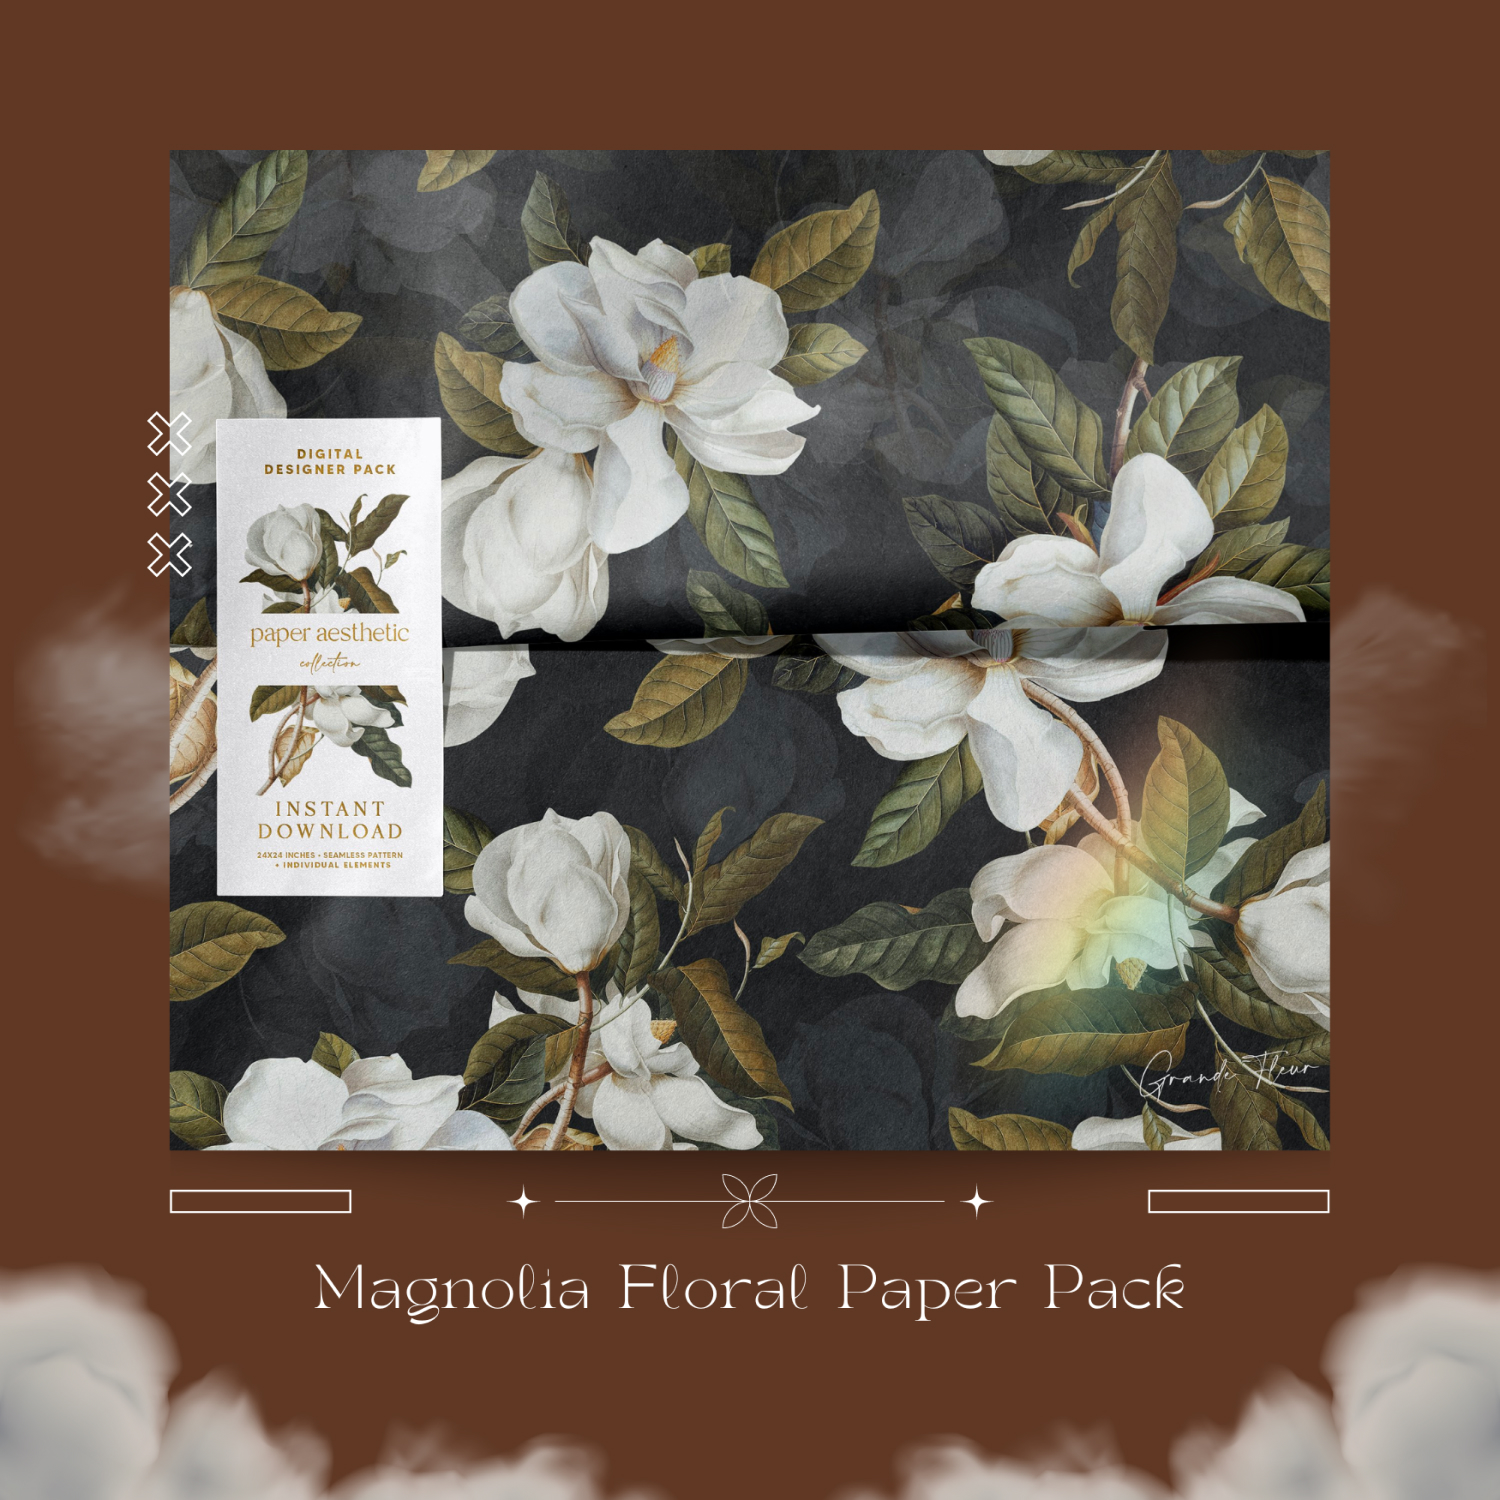 Preview magnolia floral paper pack.